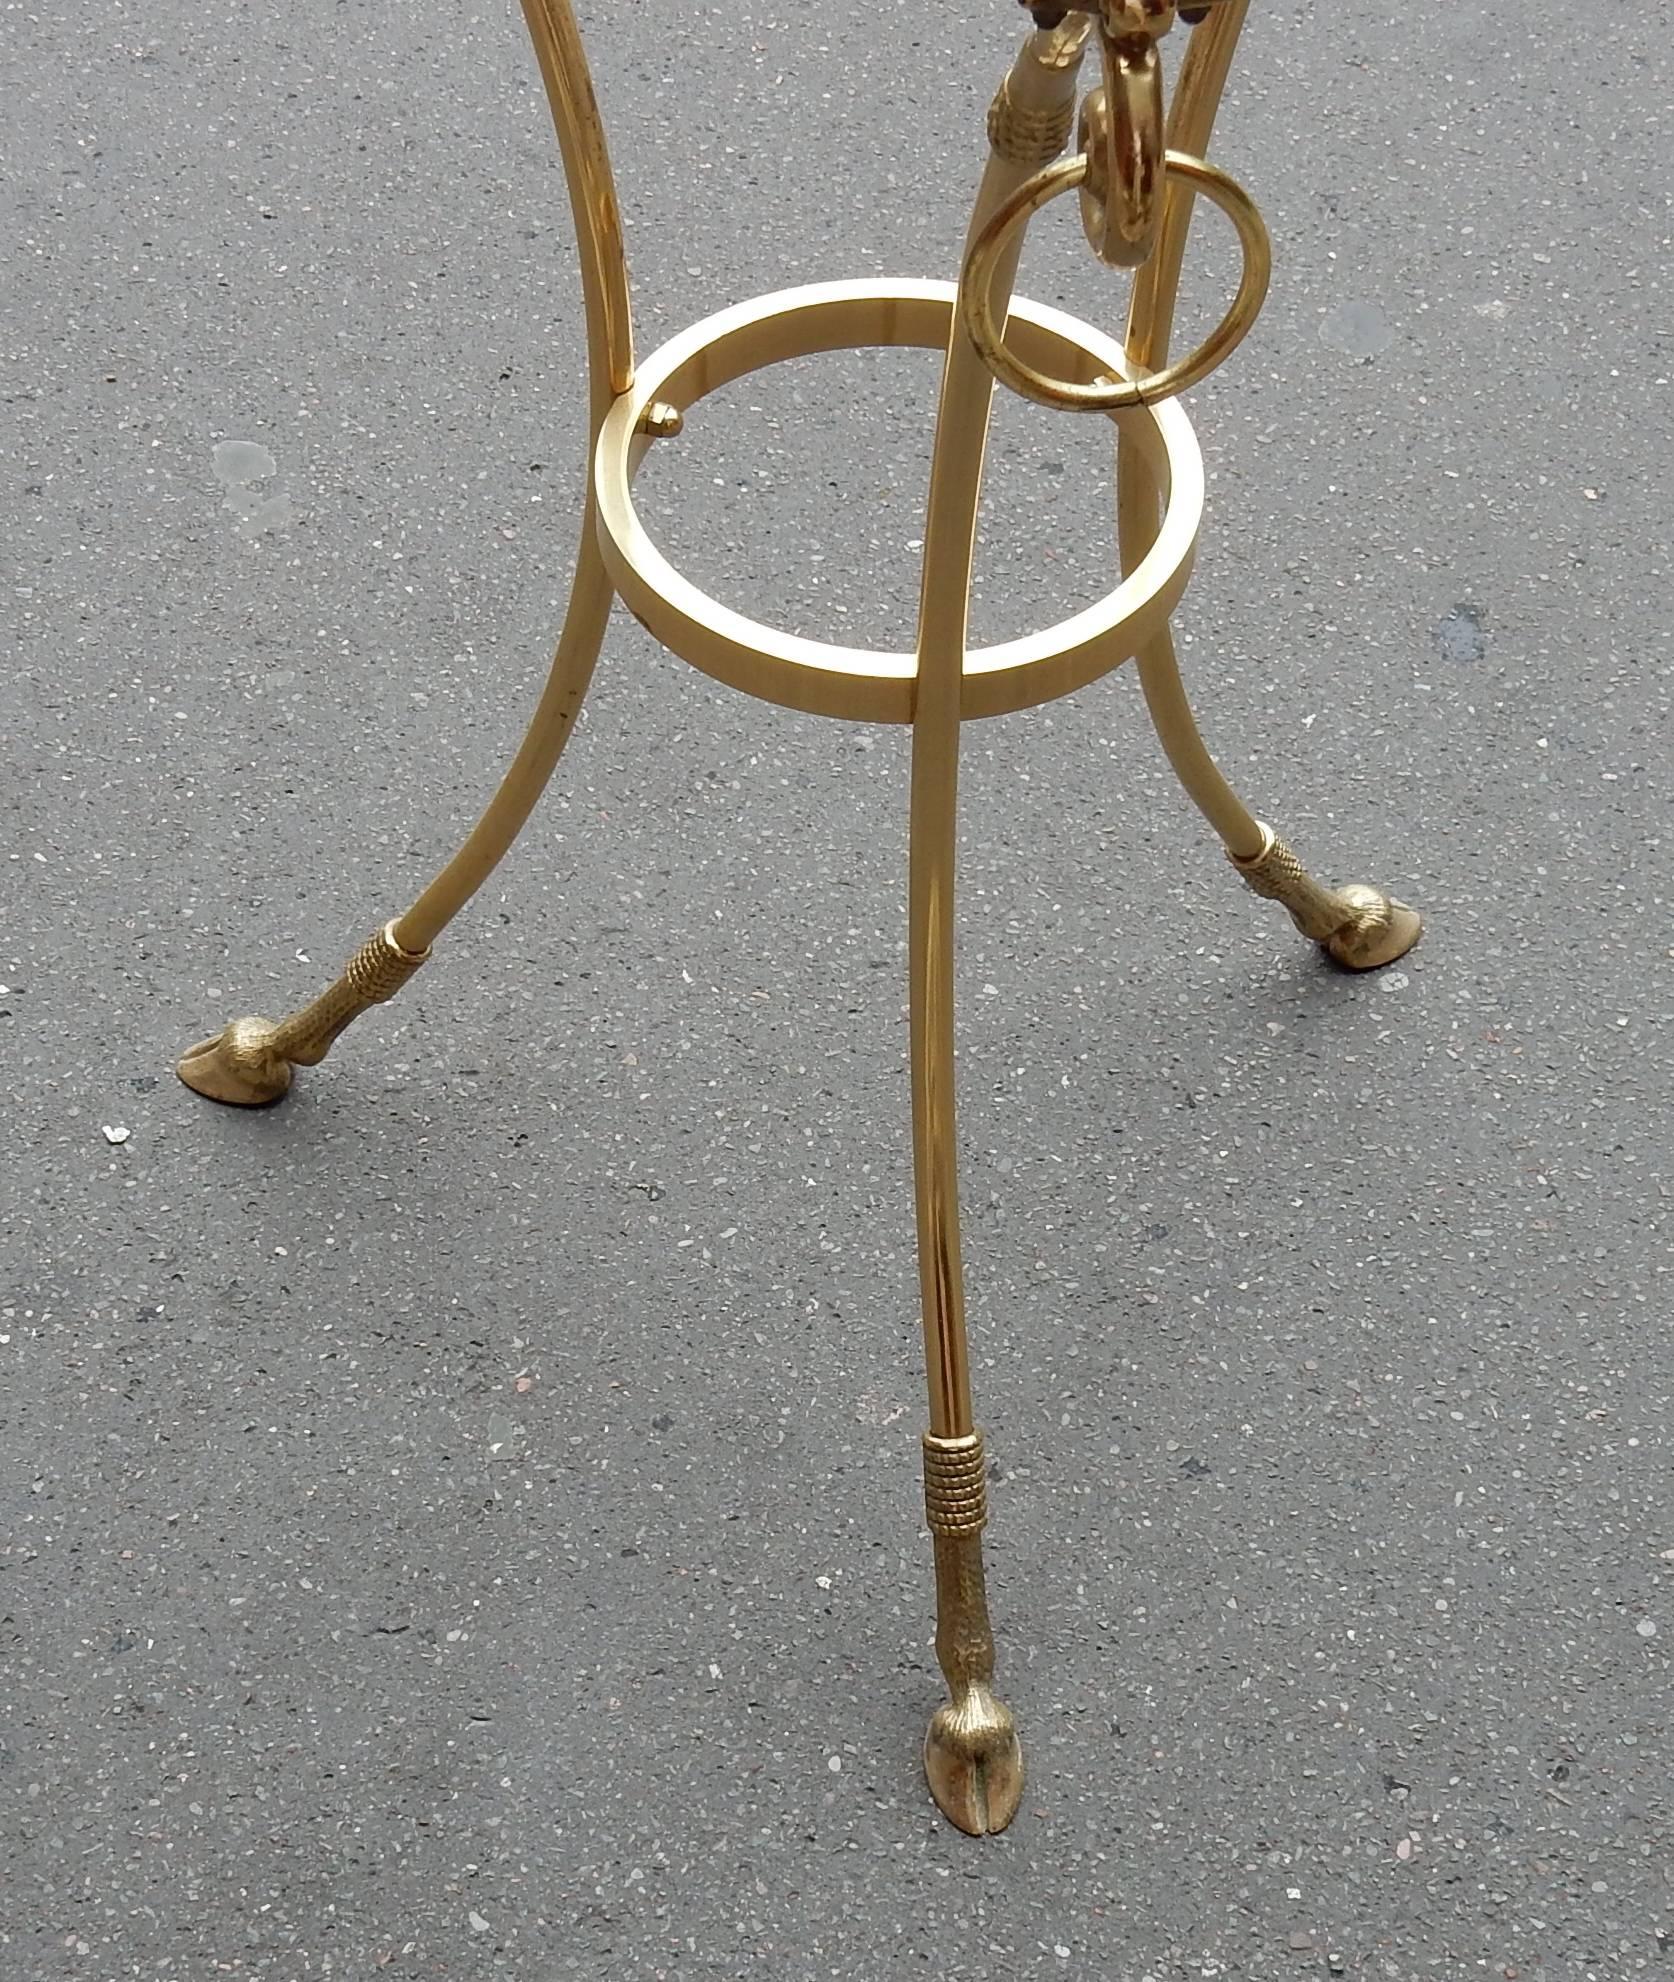 1970-1980 Pedestal Table in Gilt Bronze with Top in Glass Style Maison Charles 1